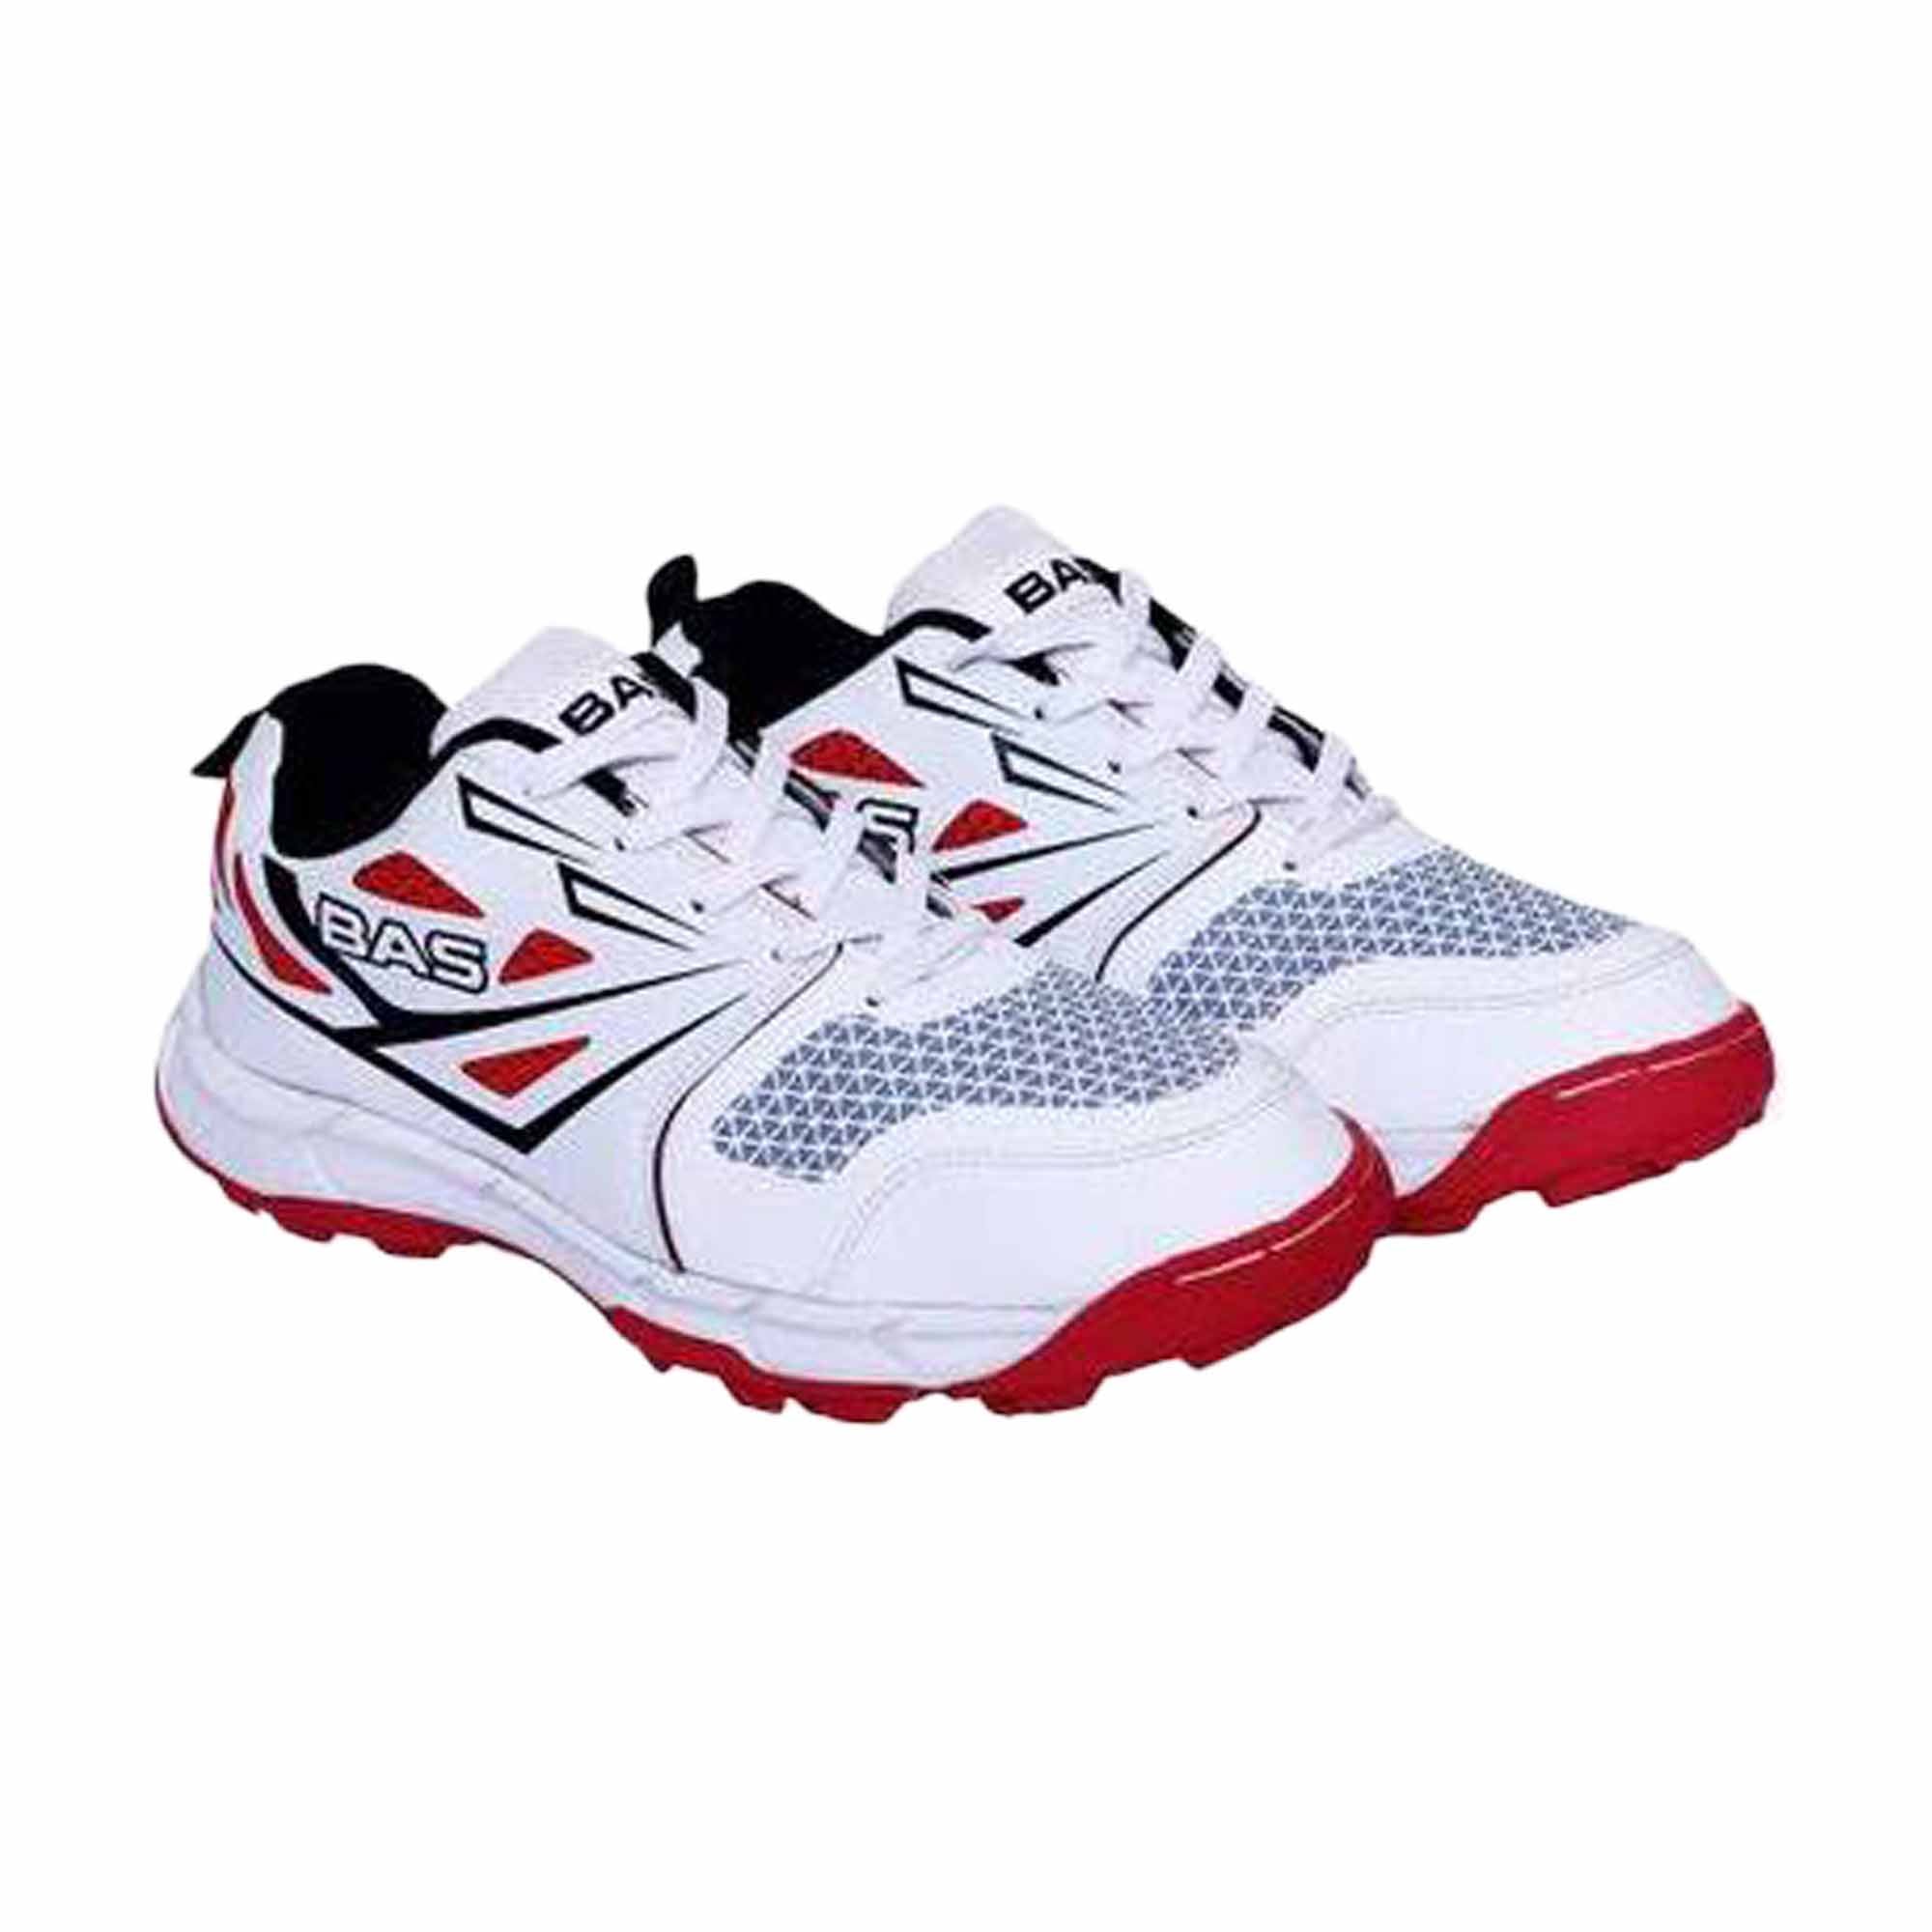 Bas Rubber Spike Cricket Shoes - White/Red